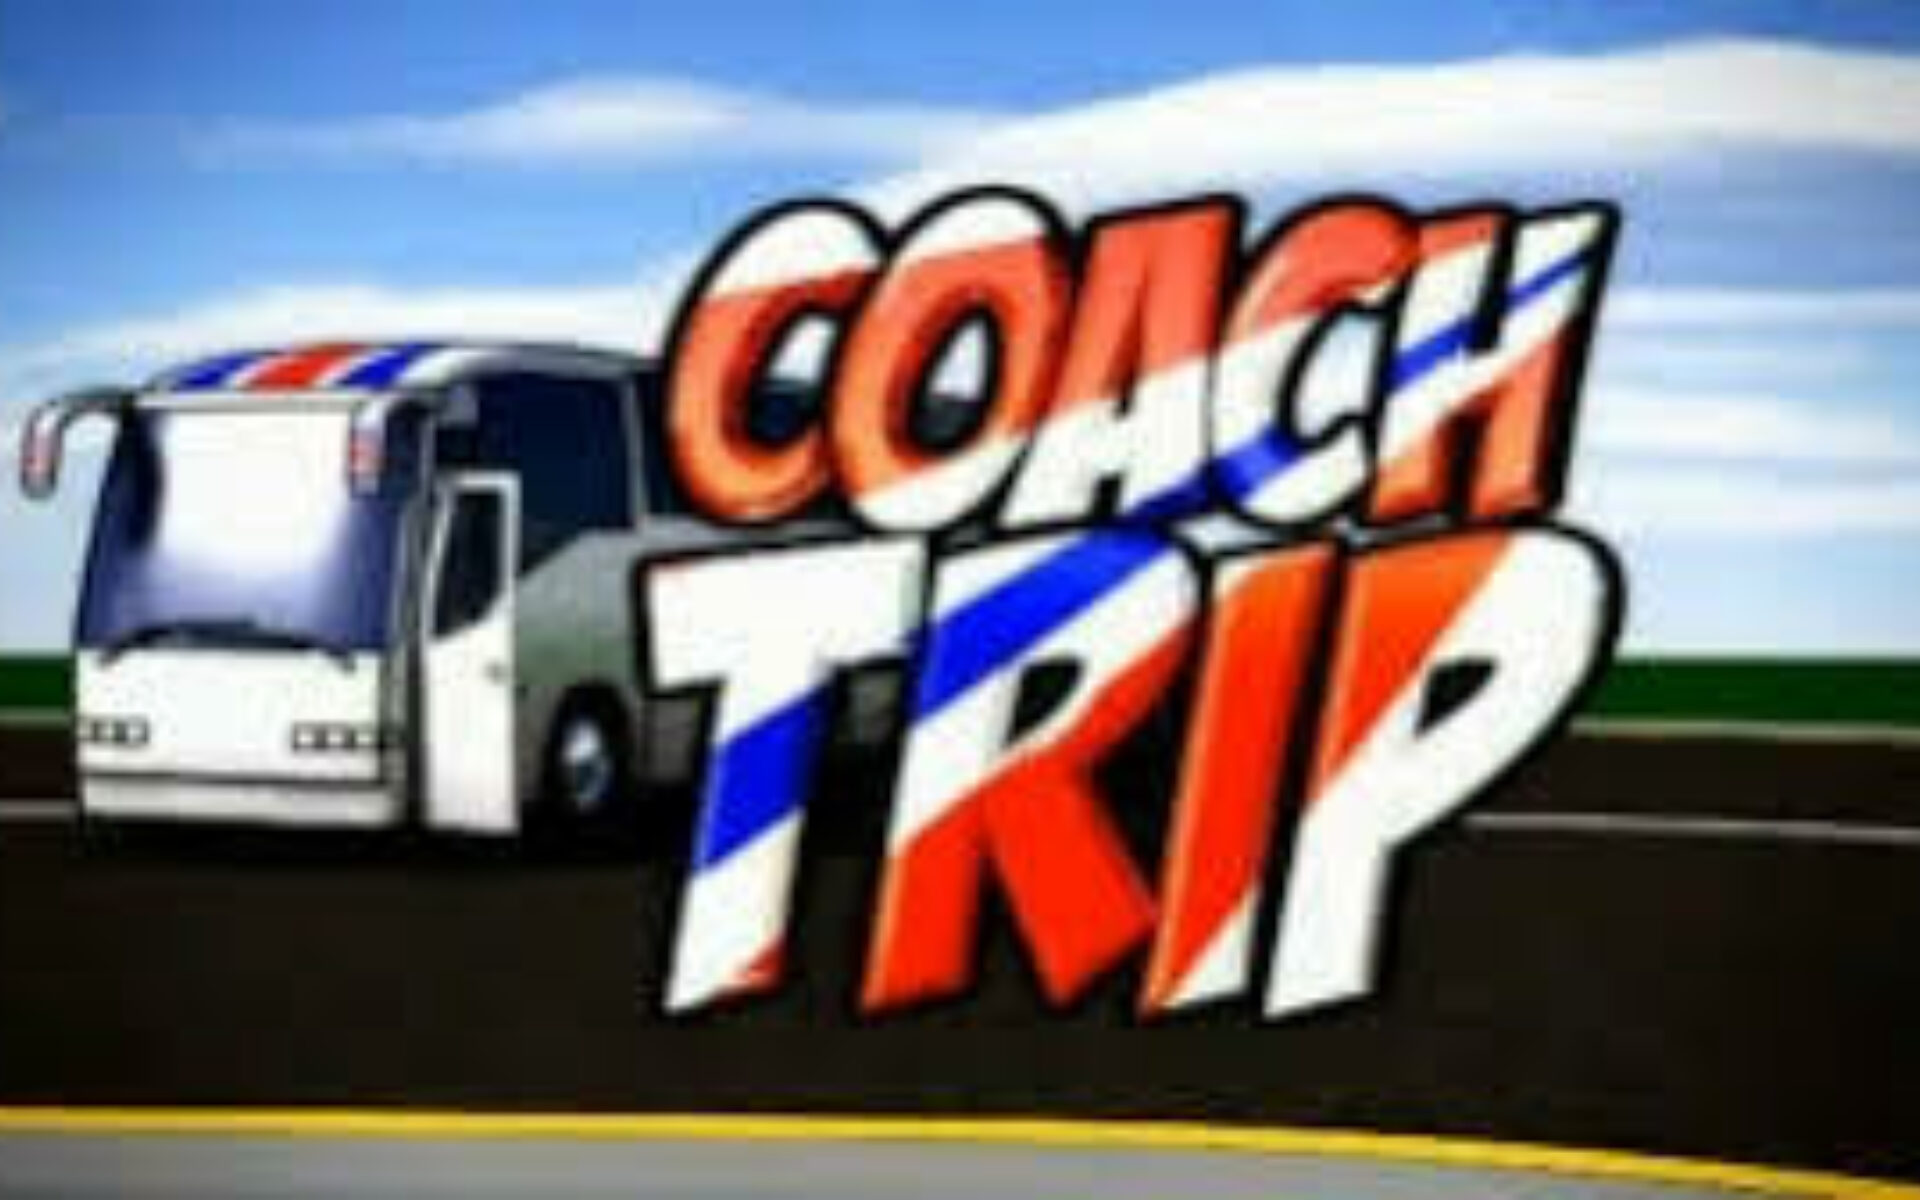 Supporter's Coach To Lowestoft Featured Image